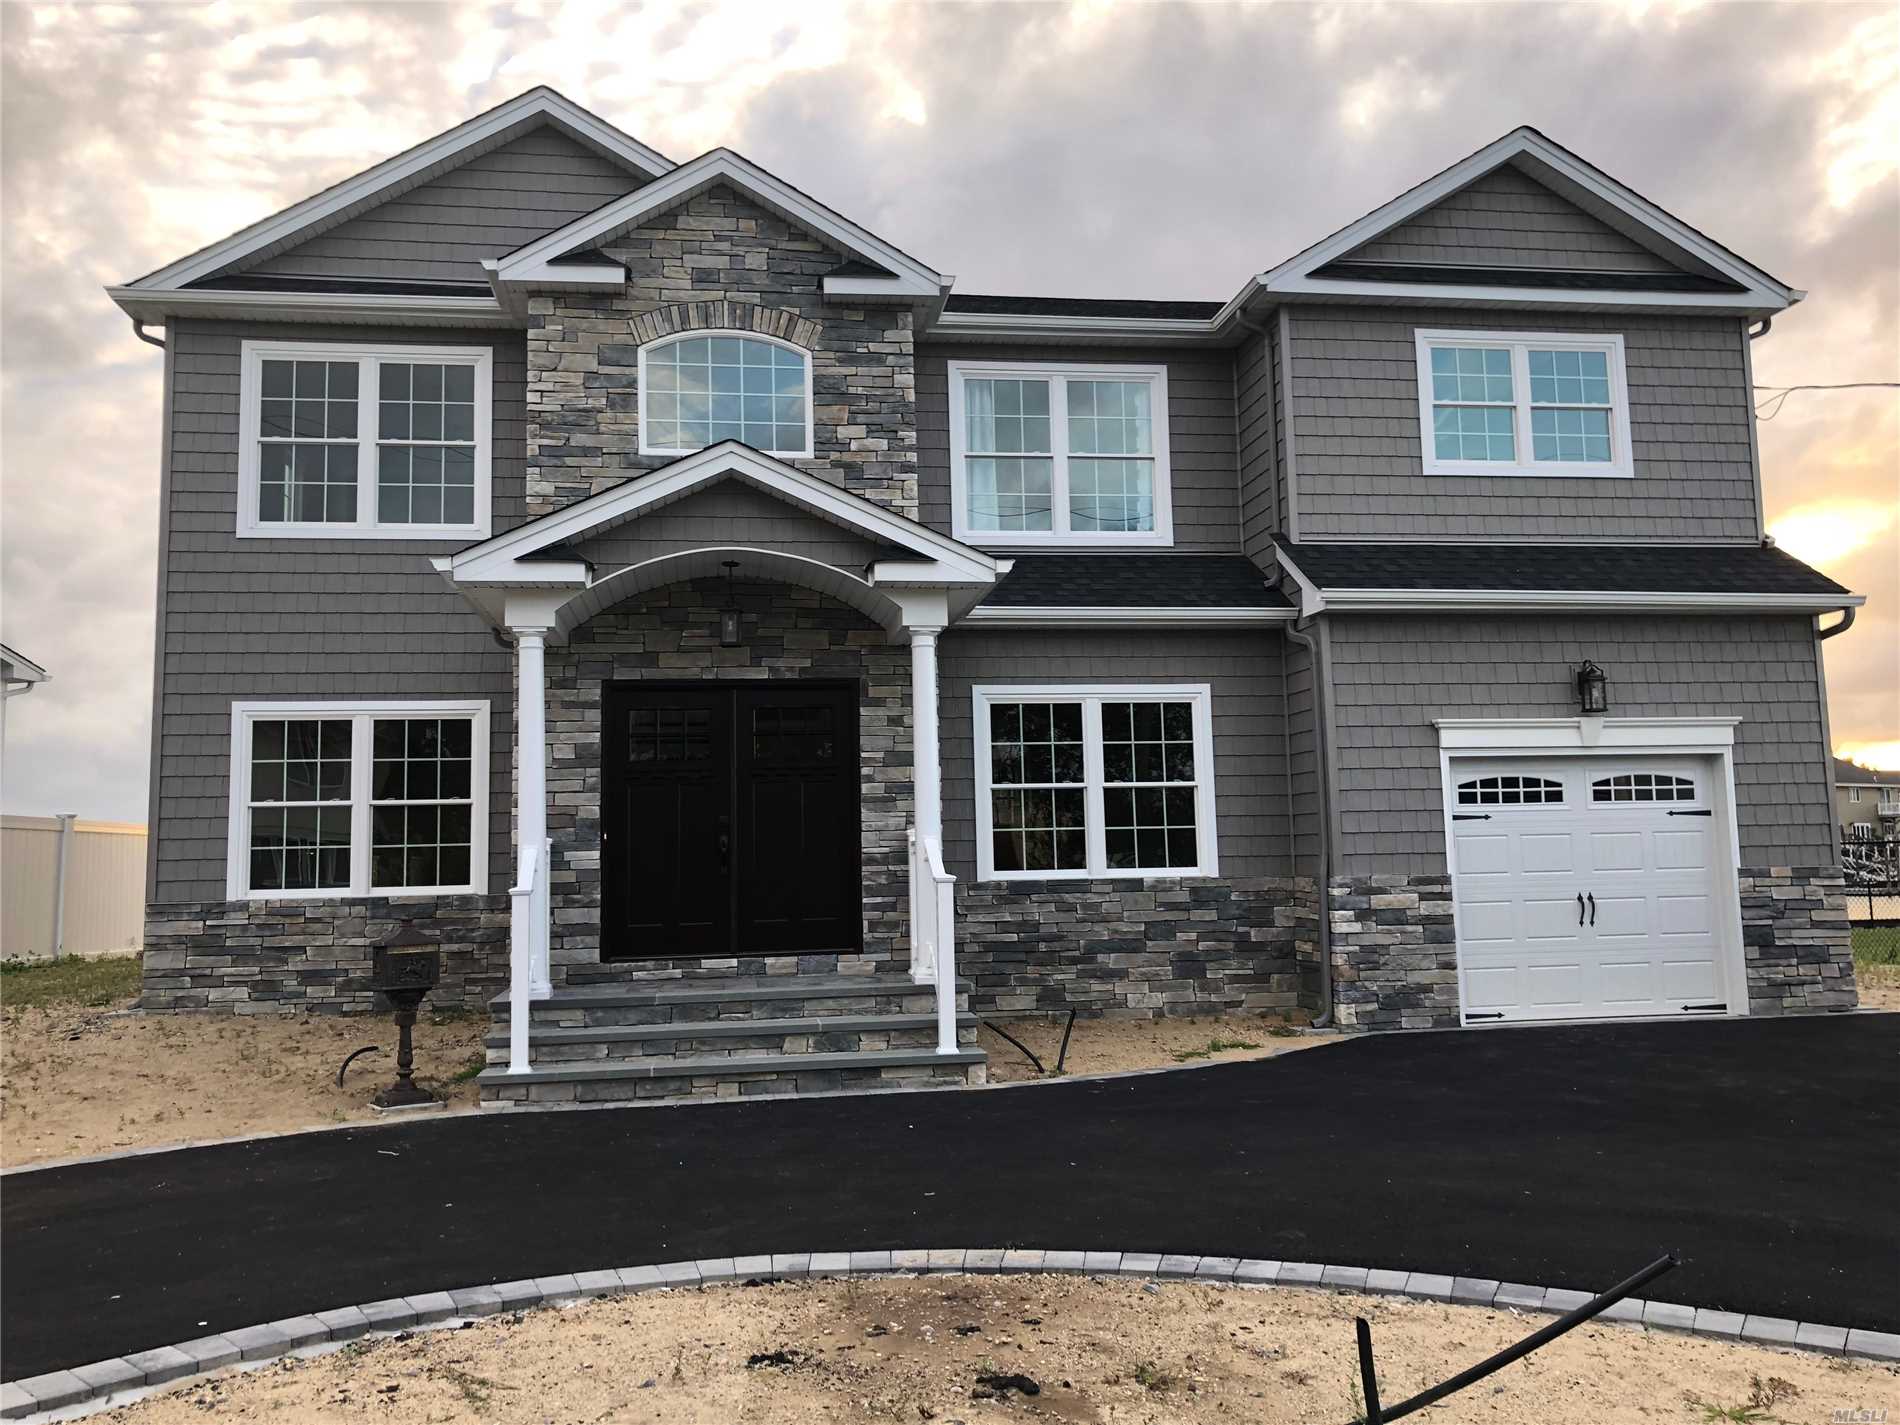 Brand-New Custom *Waterfront* Center-Hall Colonial Being Built In The 1st-Class Massapequa Shores Neighborhood & On Pristine Block Filled W/ Nice Homes! Built By Builder Of 30+ Yrs/350+ Homes. Home Features: Custom Kitchen & Vanities W/ Ss Prof Appliances, Pella Wdws, Sophisticated Moldings Throughout, 1.5-Car Gar, 1st Flr Bdrm/Office, 3 F-Baths, & Large Master Suite W/ Balcony & 2 Wic&rsquo;s & Fbath+Jacuzzi, +++Much More!